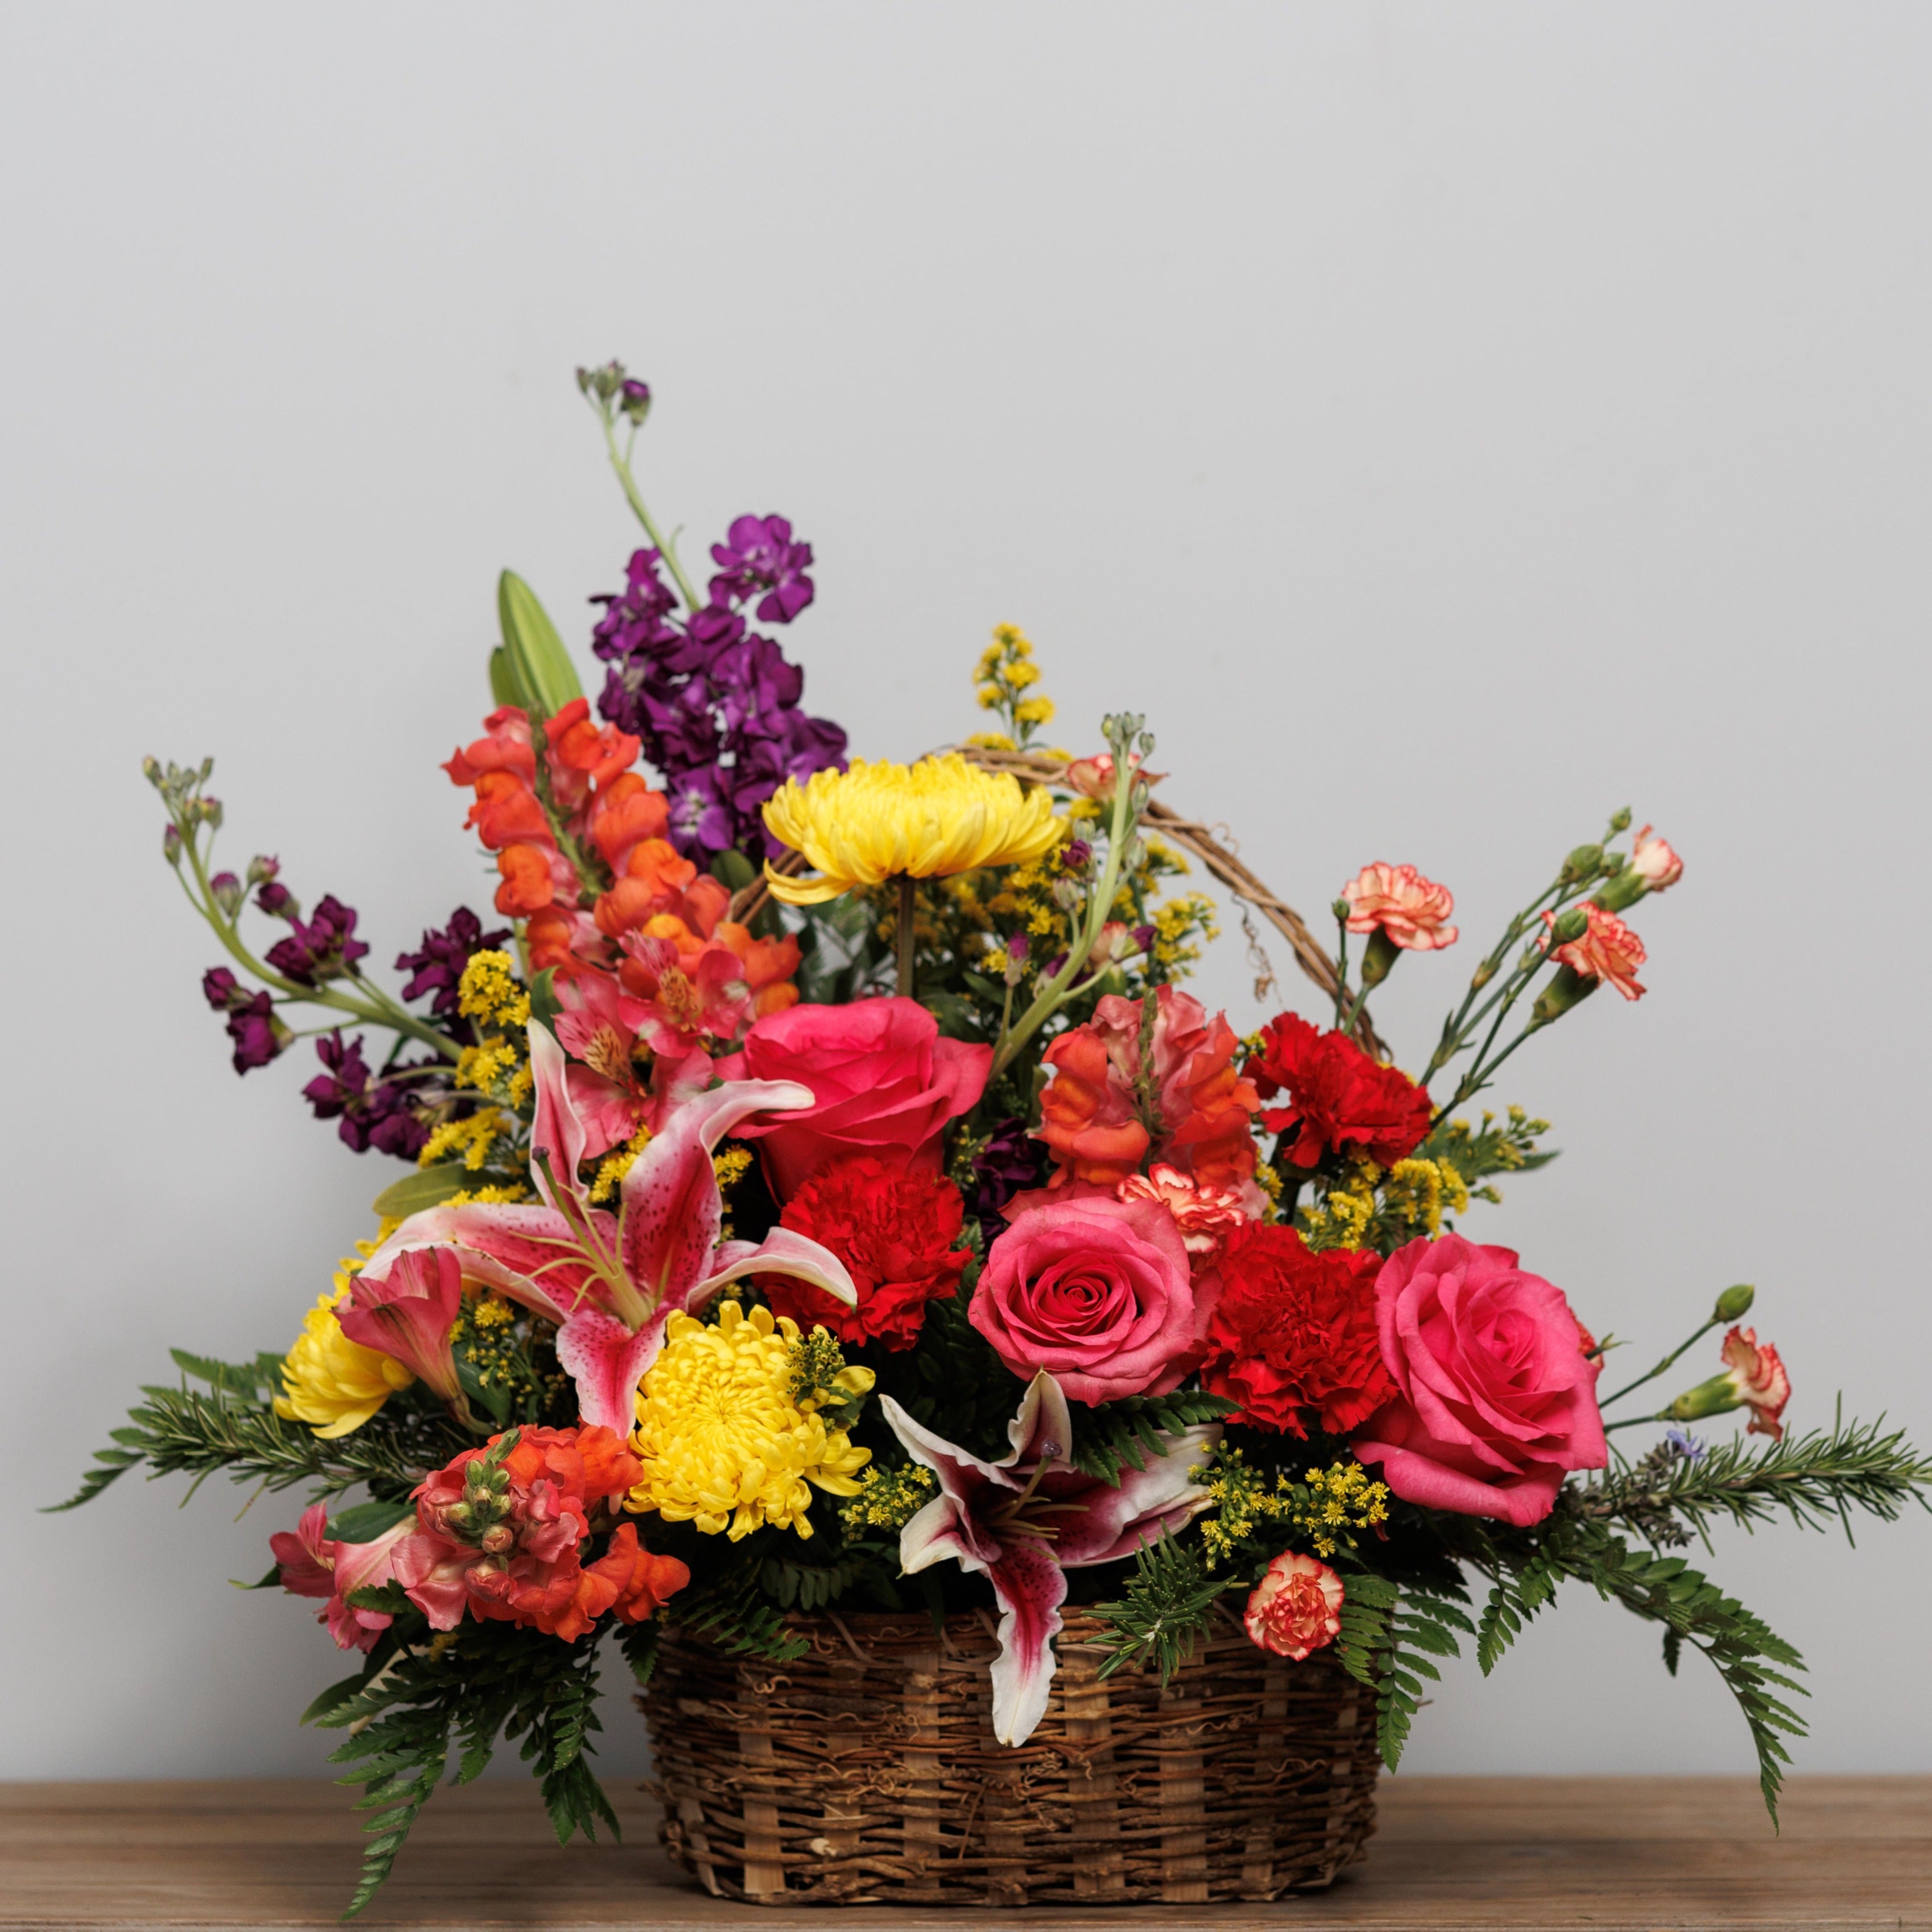 A basket full of colorful fresh flowers.